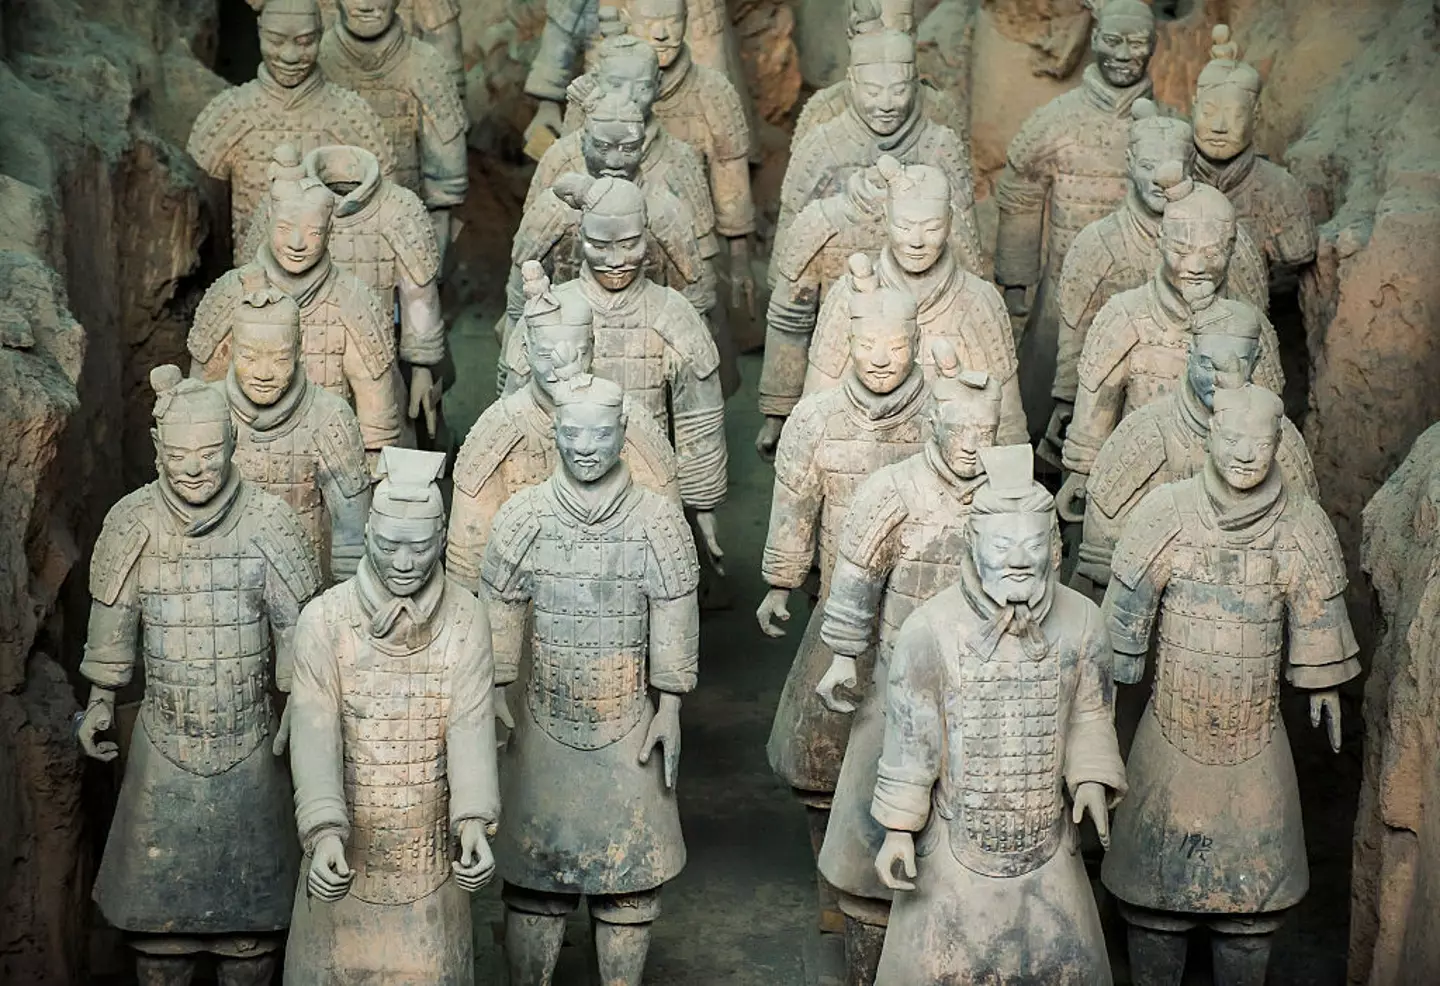 Some artefacts inside the chamber might not survive seconds in Xi'an's dry climate.